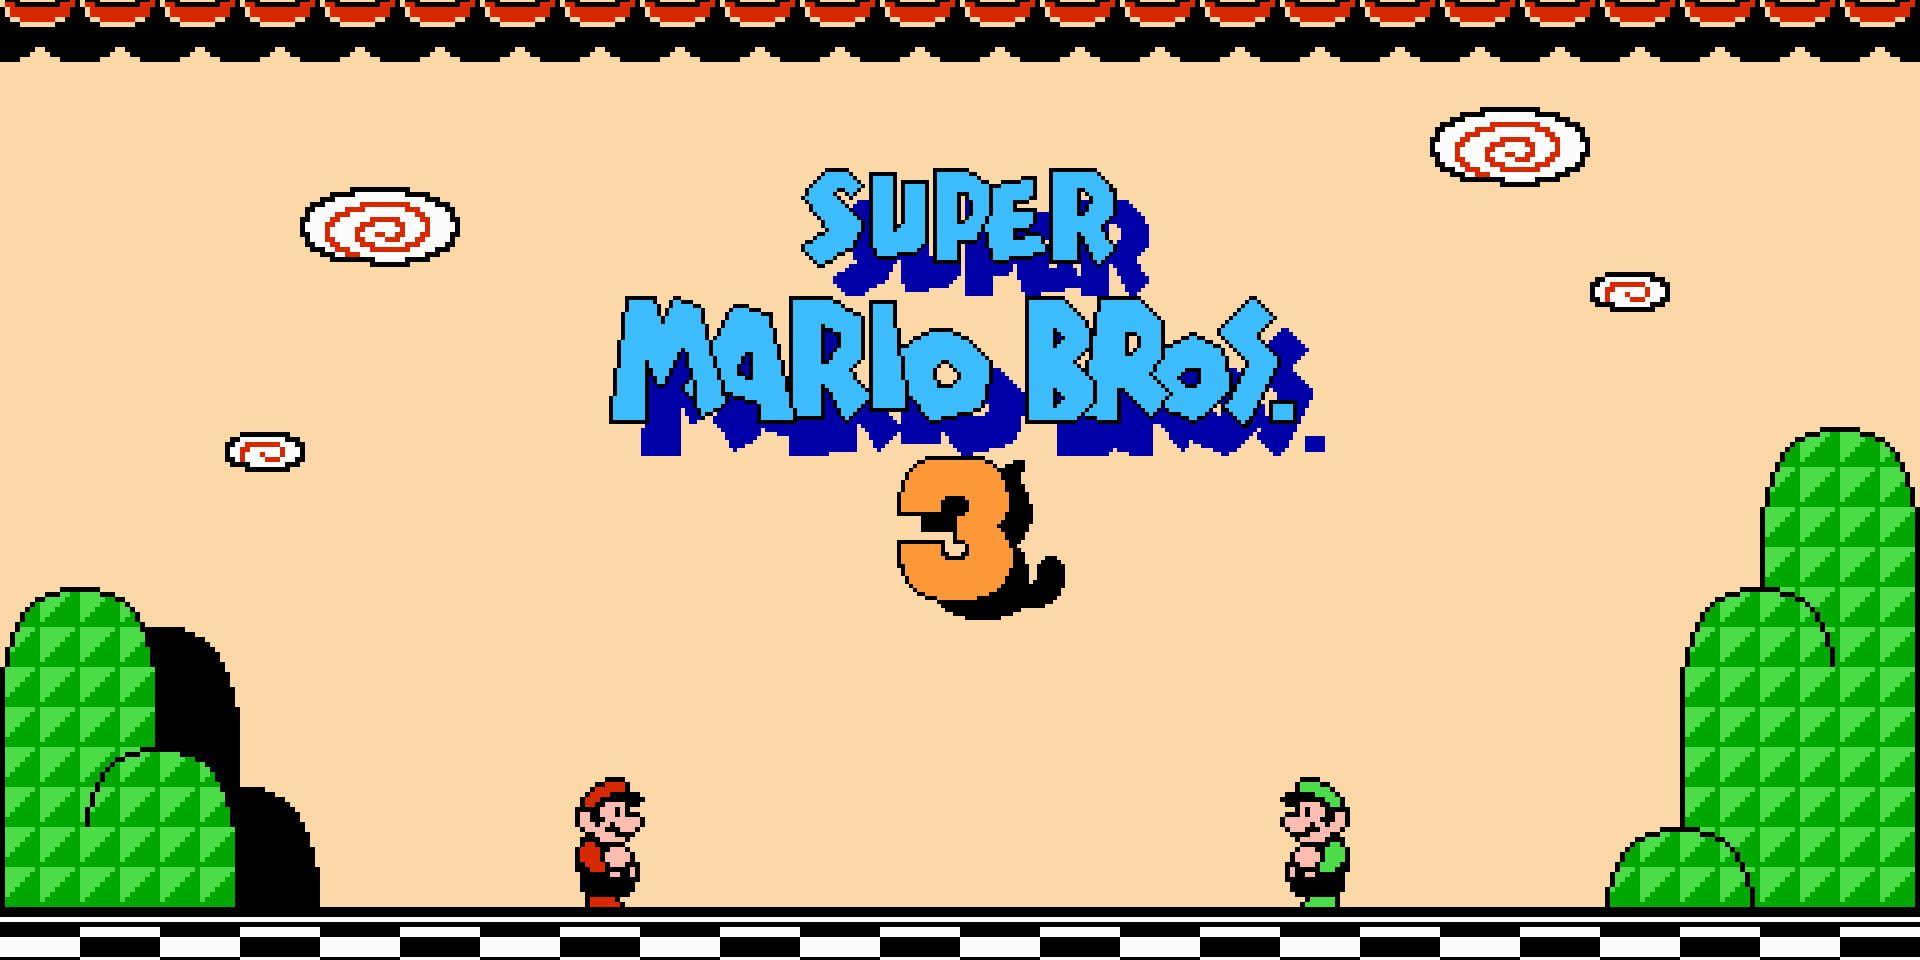 Mario Browser Logo - Super Mario Bros. 3' is a classic, but I couldn't see past the art I